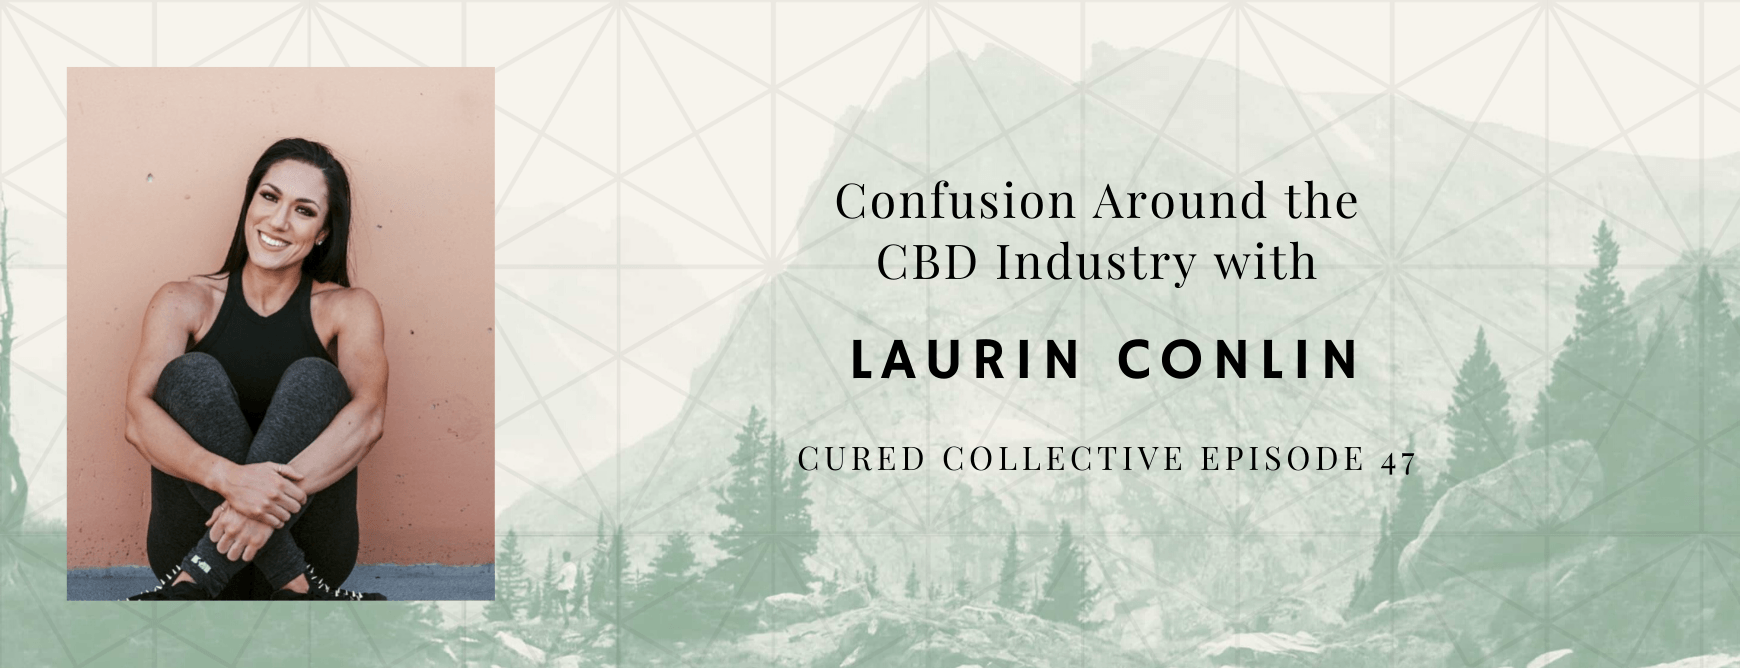 Cured Collective CBD Podcast with Laurin Conlin